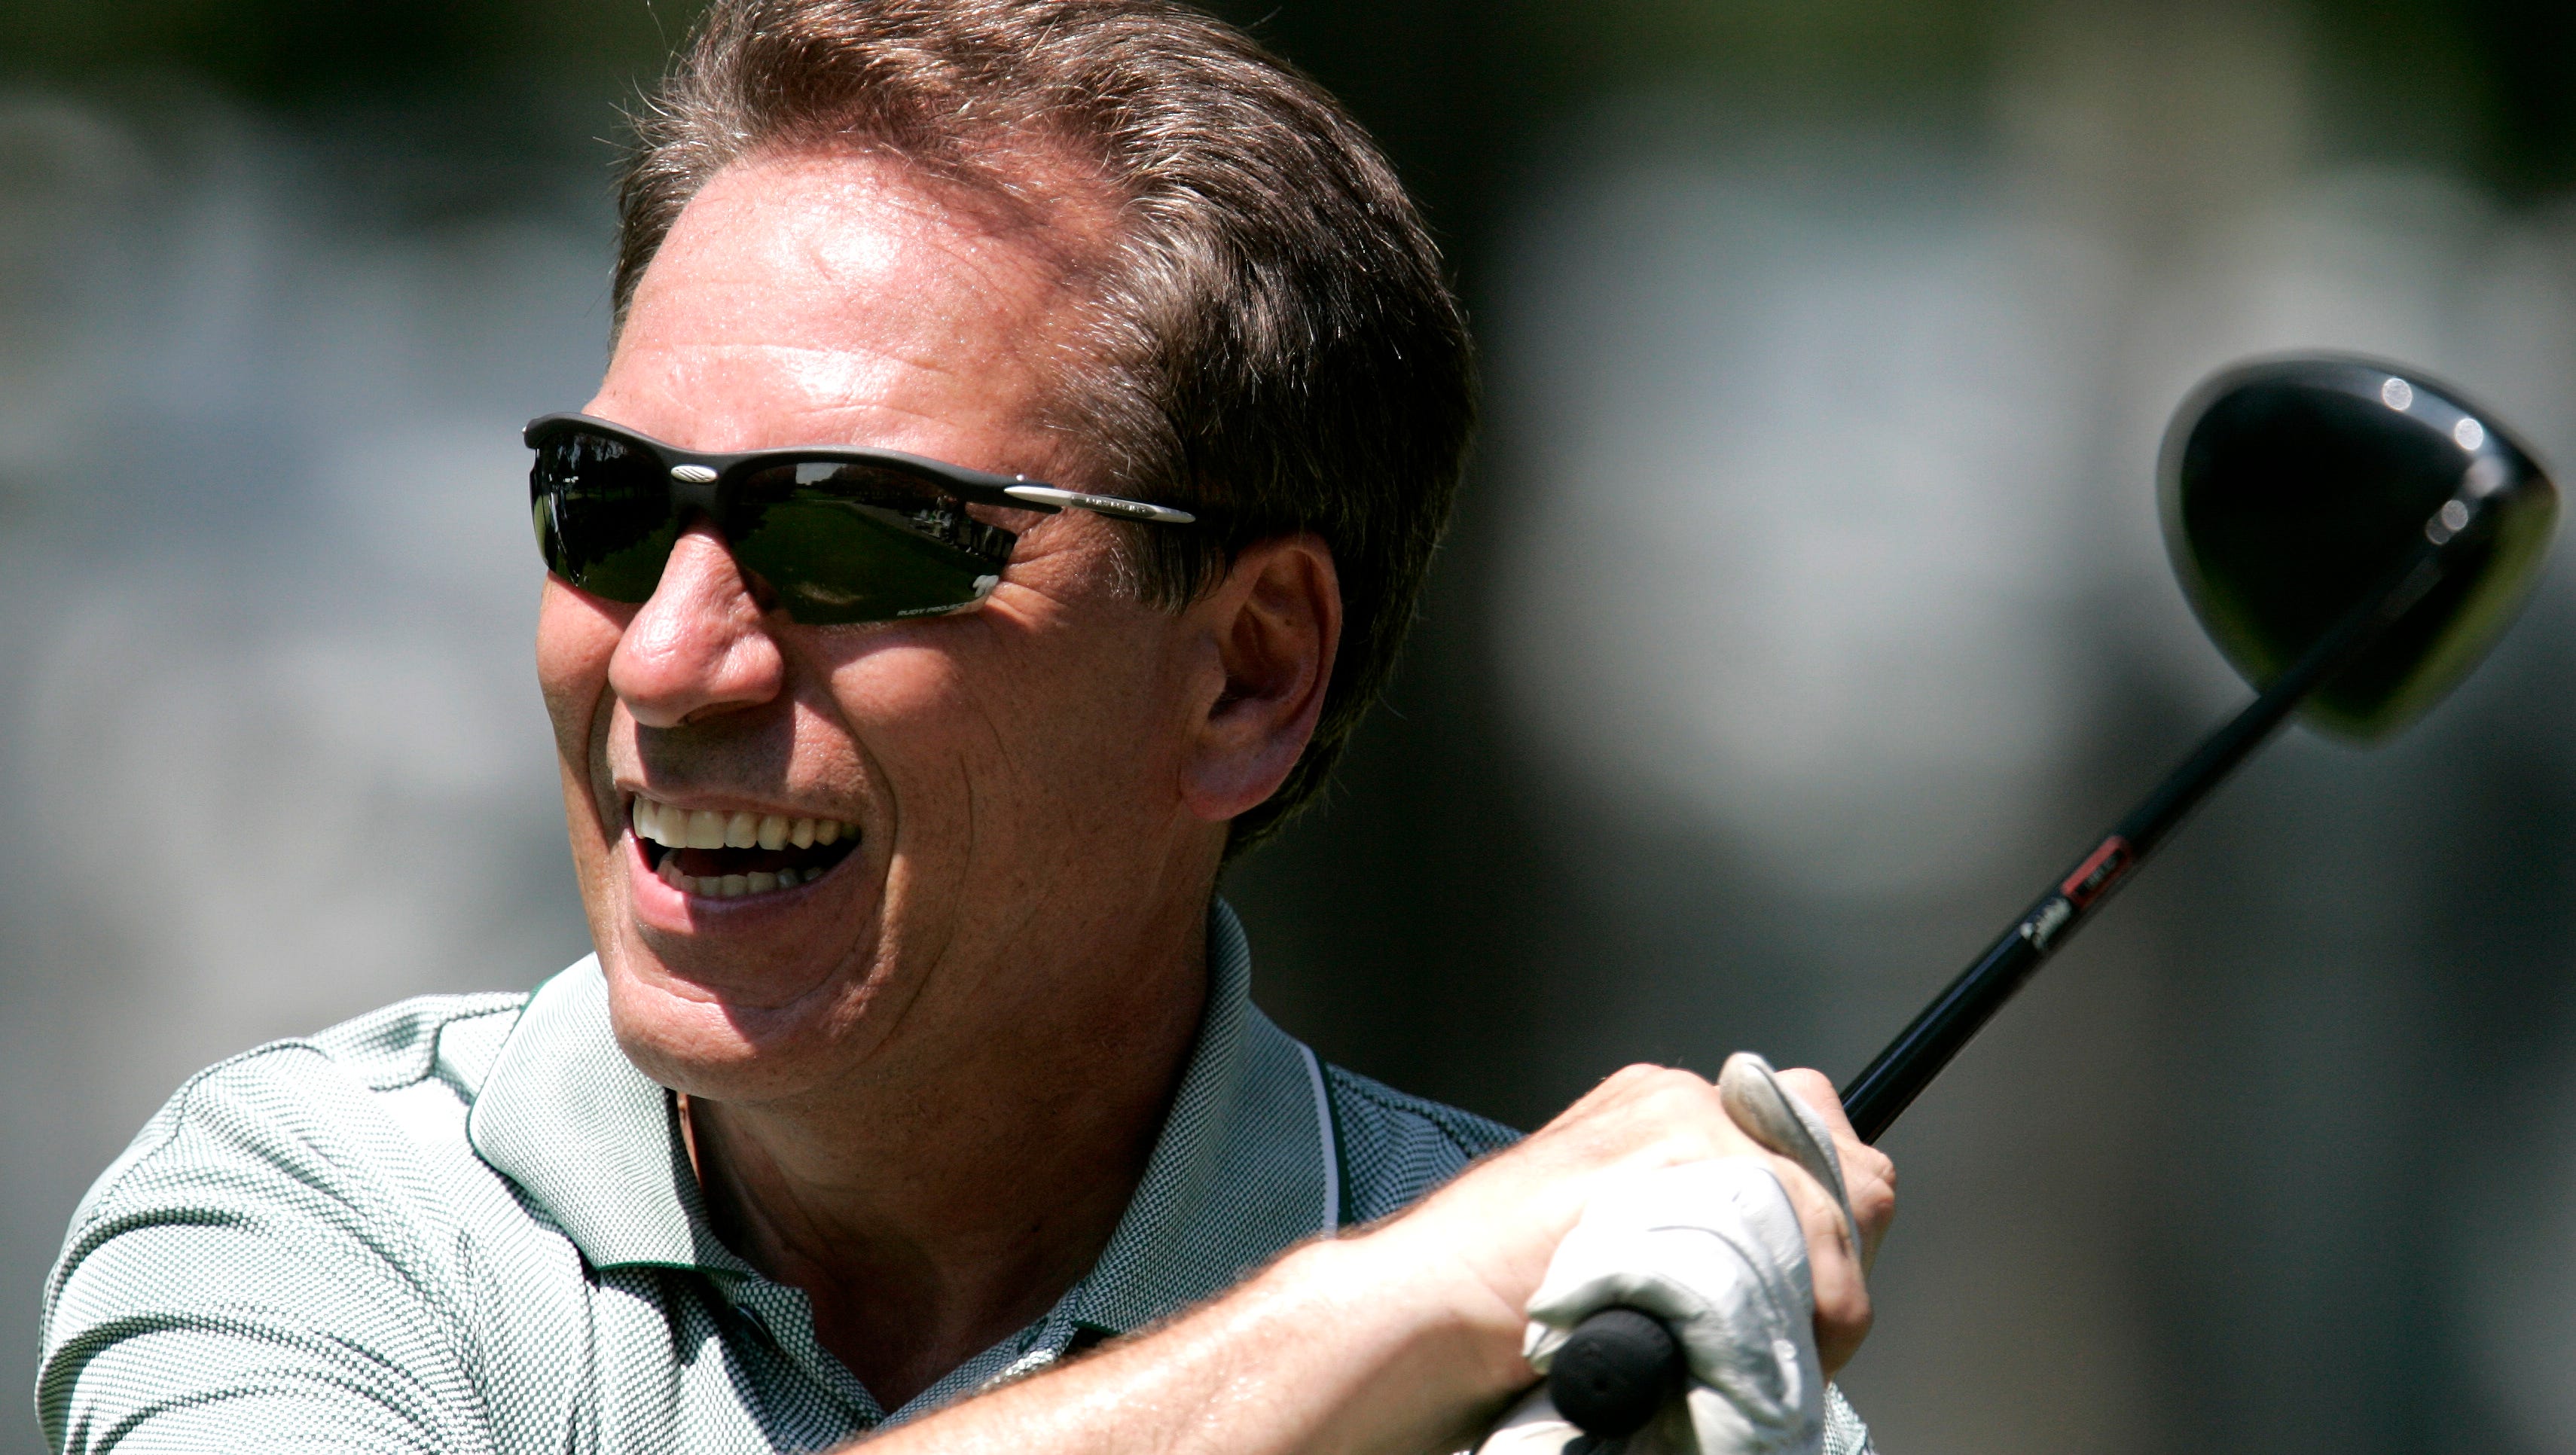 Tom Izzo watches his tee shot on the 12th hole at the 2006 Buick Open pro-am.